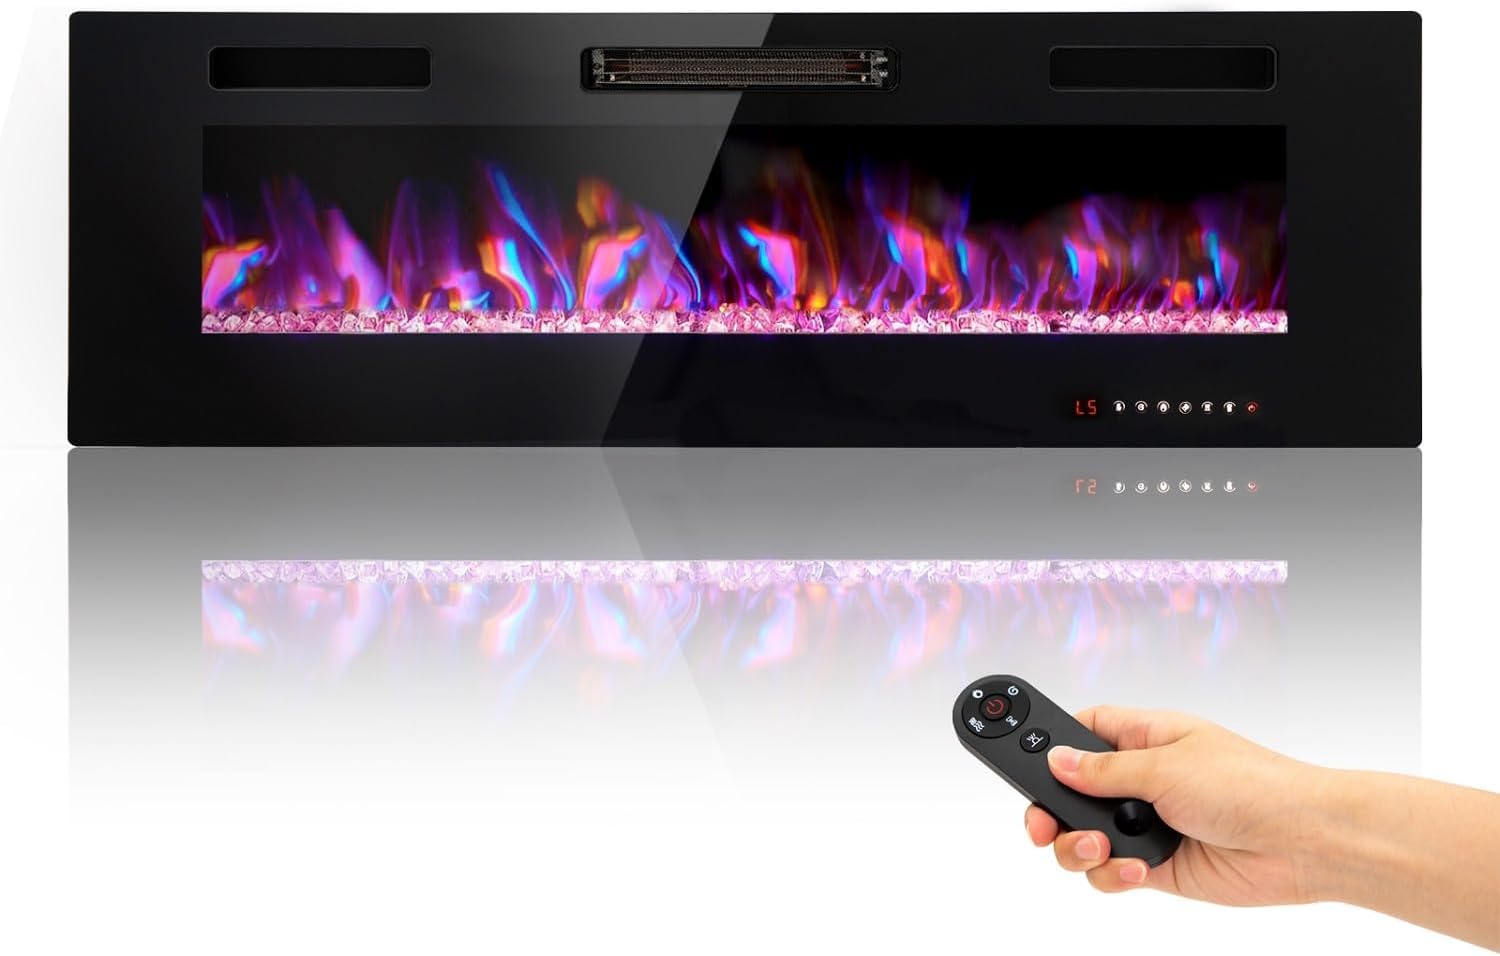 MFSTUDIO 50 inches Electric Fireplace with Remote Control & Touch Screen, Recessed and Wall Mounted Fireplace Heater, Linear Fireplace with 12 Colors Adjustable Flame Color, Timer, 750w/1500w